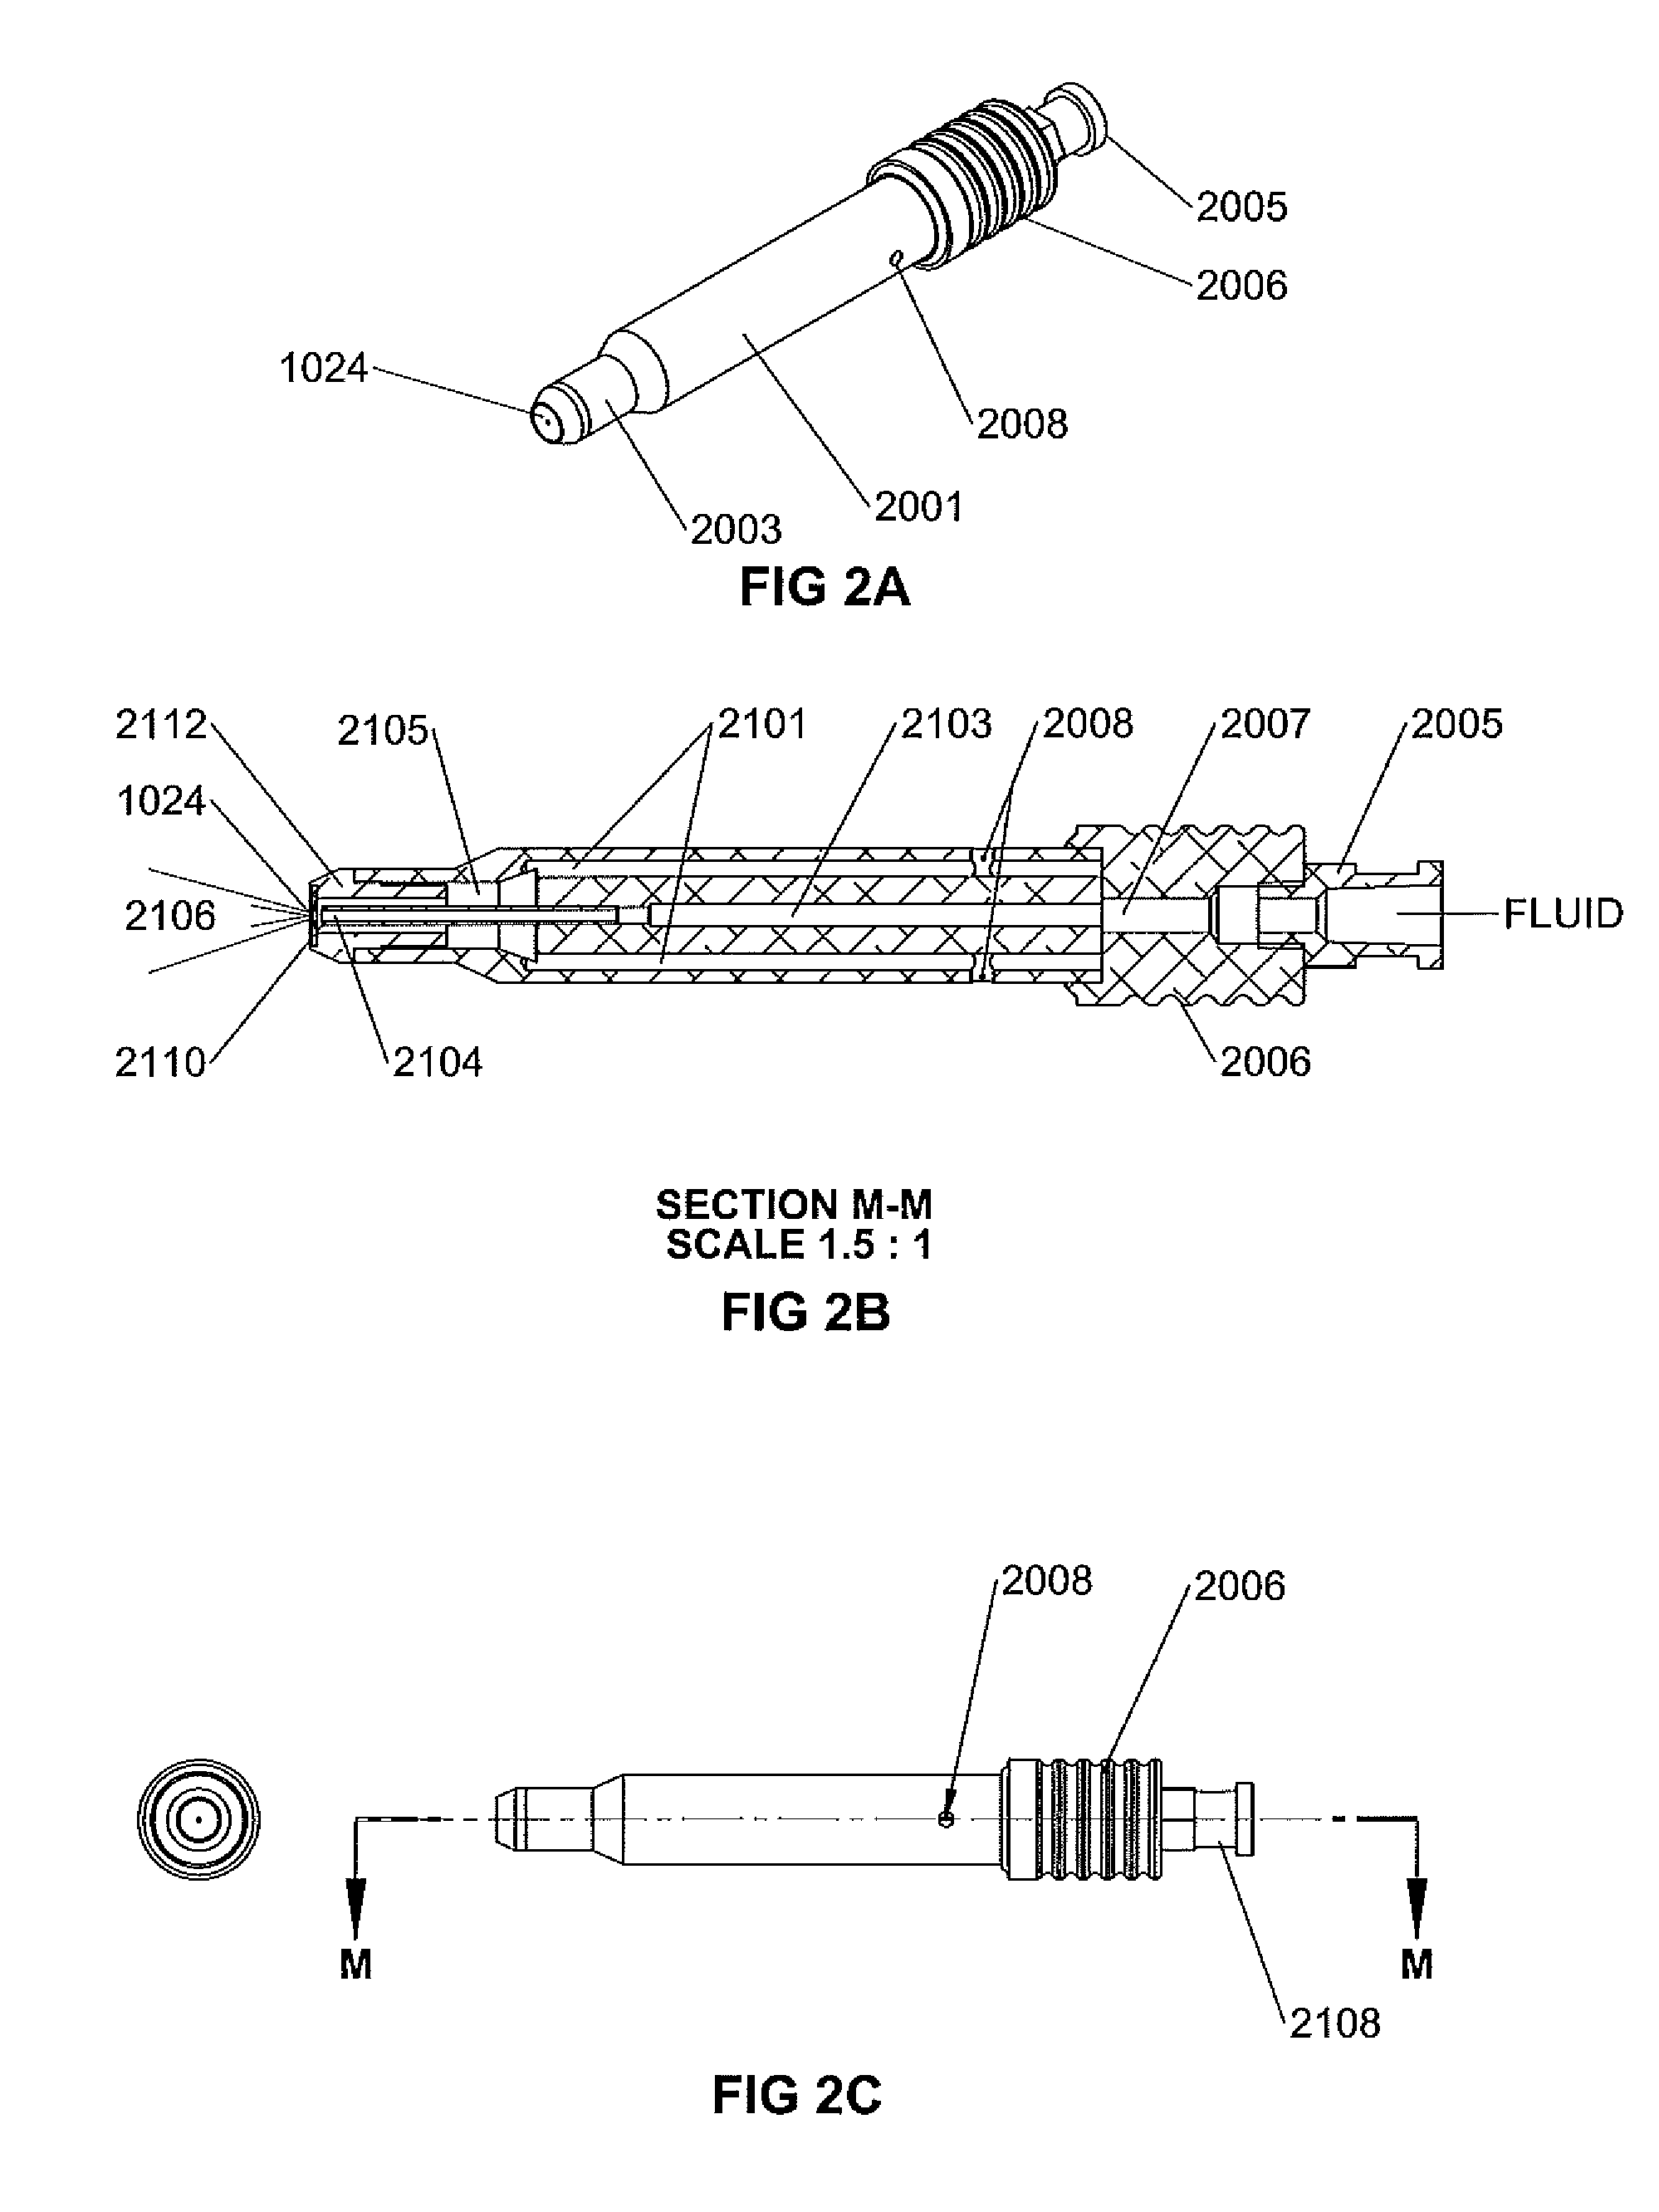 Method of operating a compact, low flow resistance aerosol generator